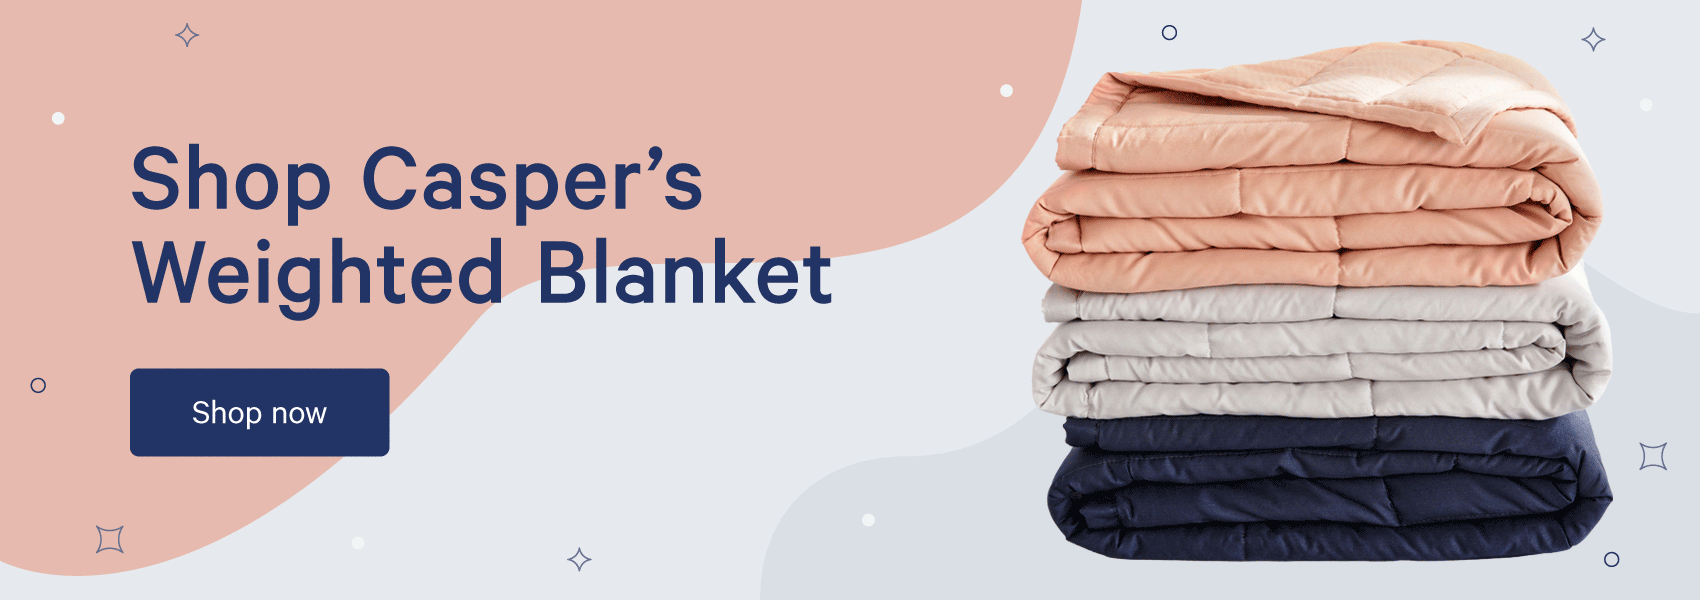 How to Choose a Weighted Blanket: 5 Questions to Ask | Casper Blog